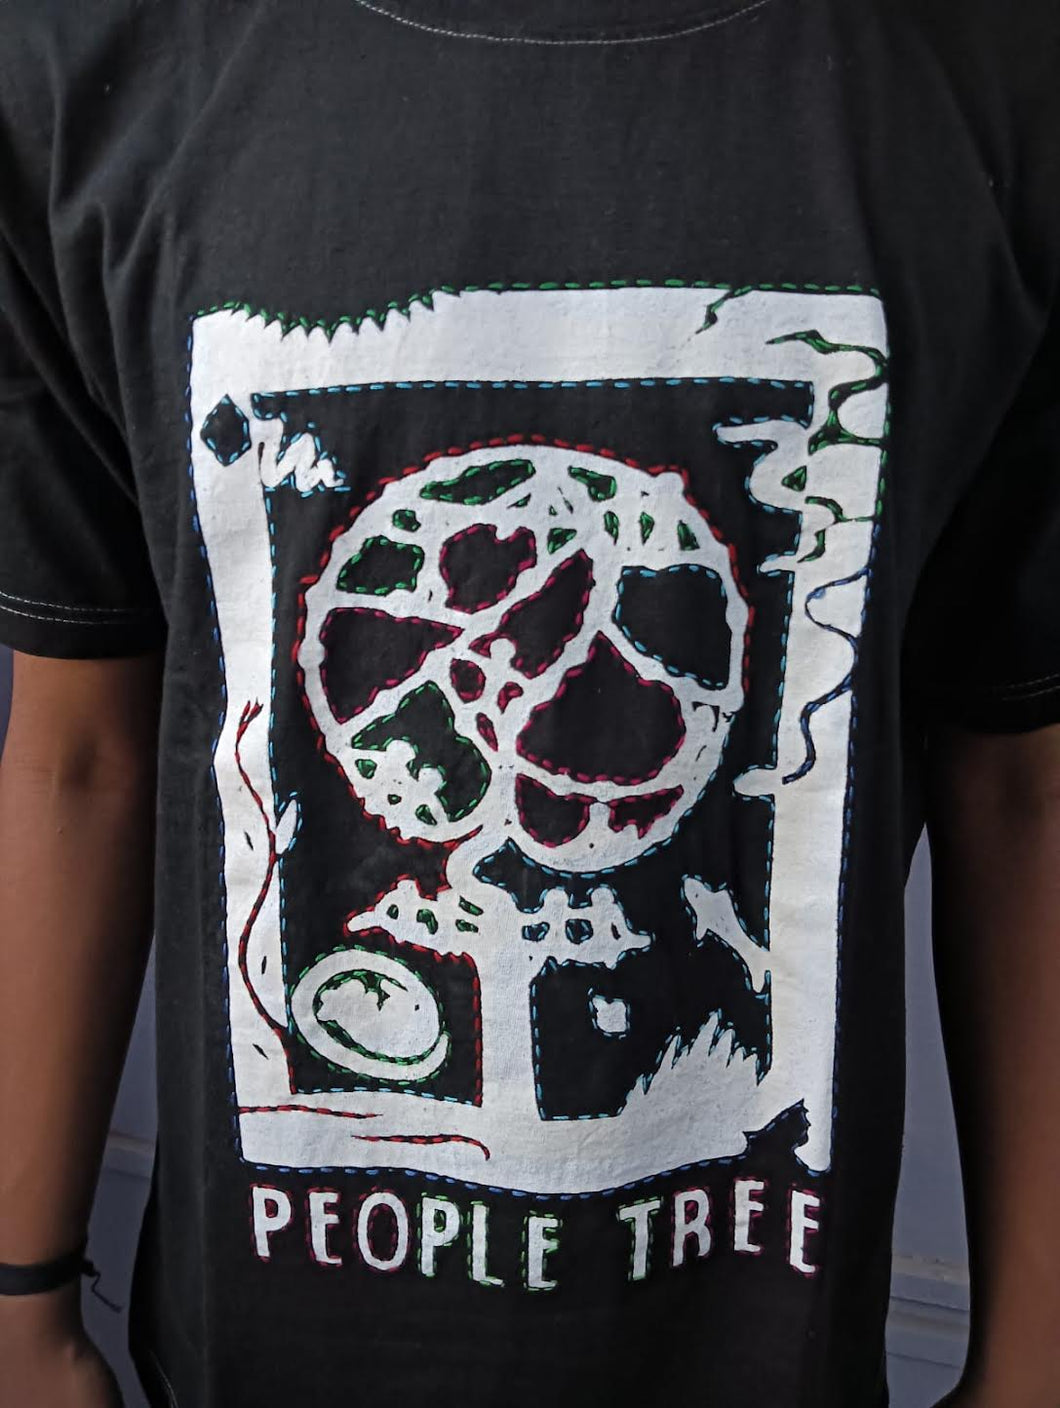 Tshirt. Embroidered Screen printed People Tree.